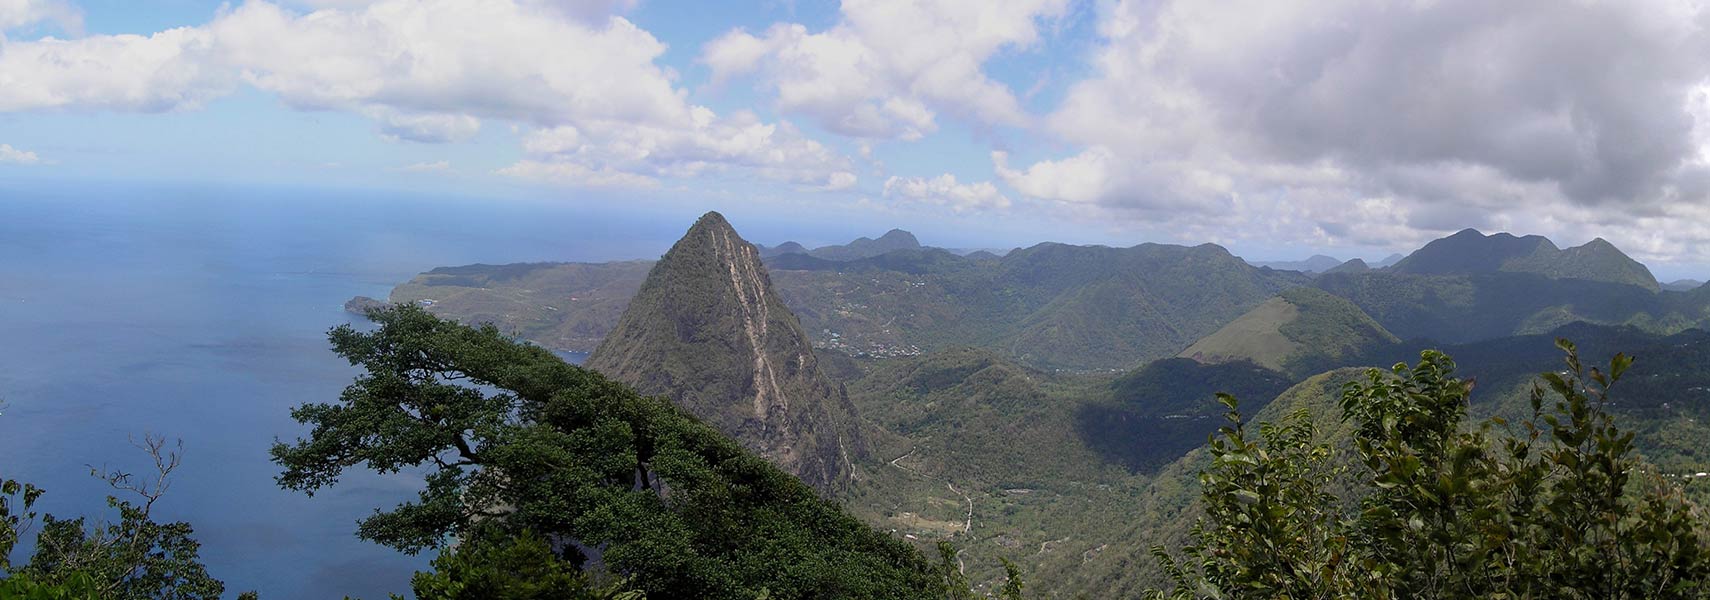 View from the top of Gros Piton, looking north, Saint Lucia